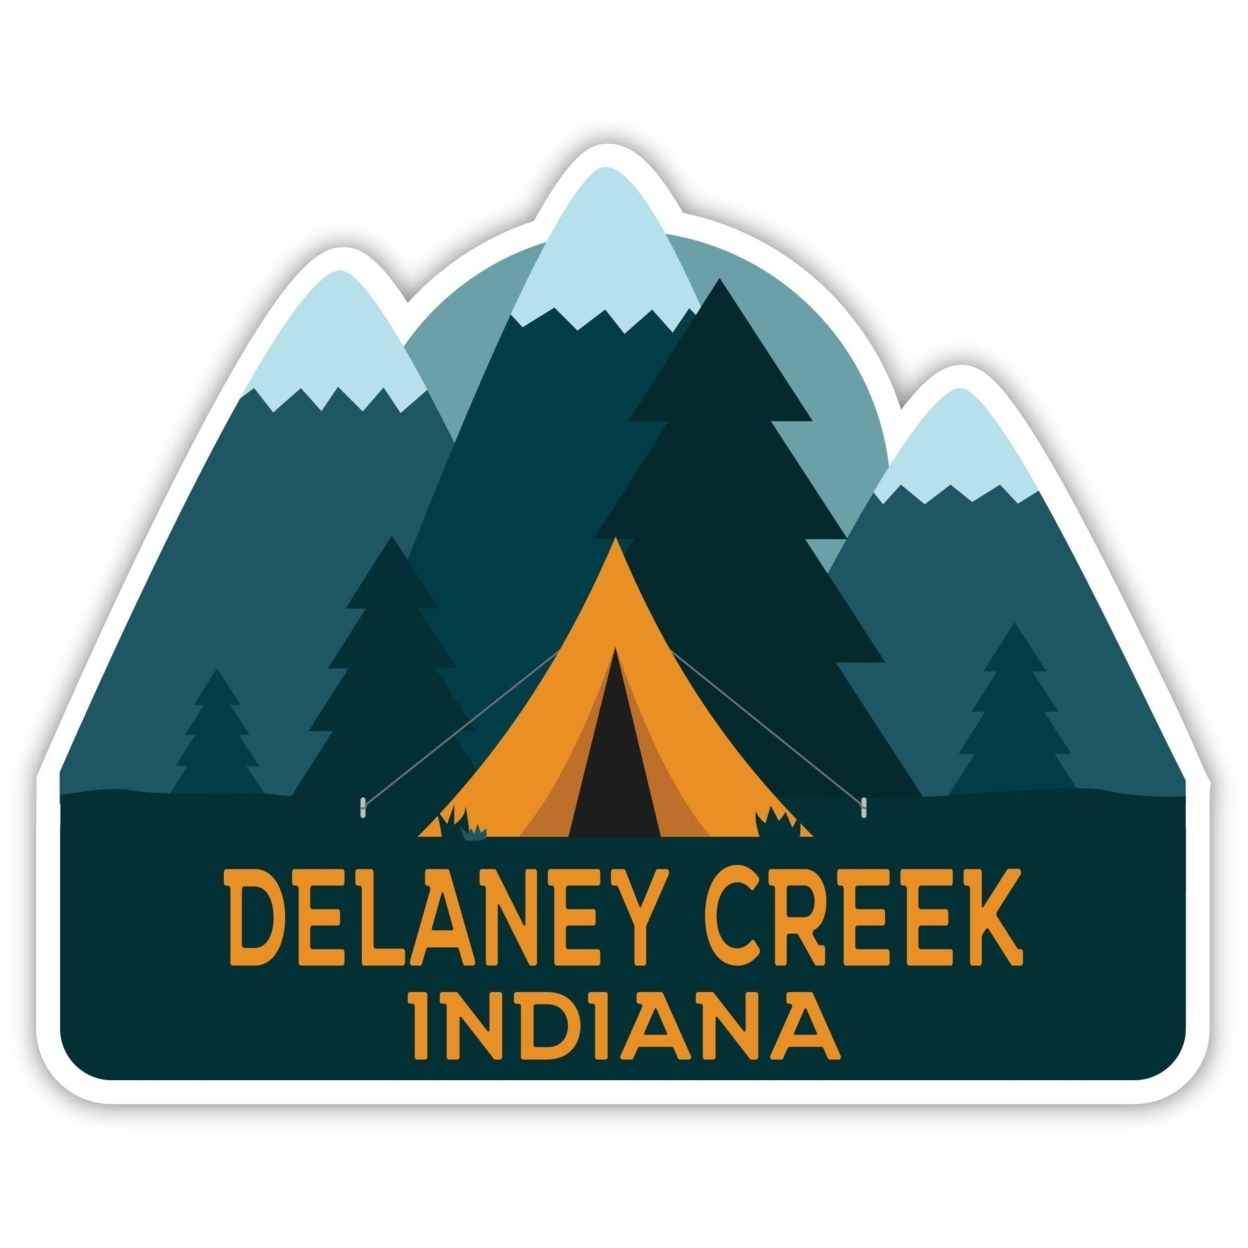 Delaney Creek Indiana Souvenir Decorative Stickers (Choose Theme And Size) - 4-Pack, 2-Inch, Tent